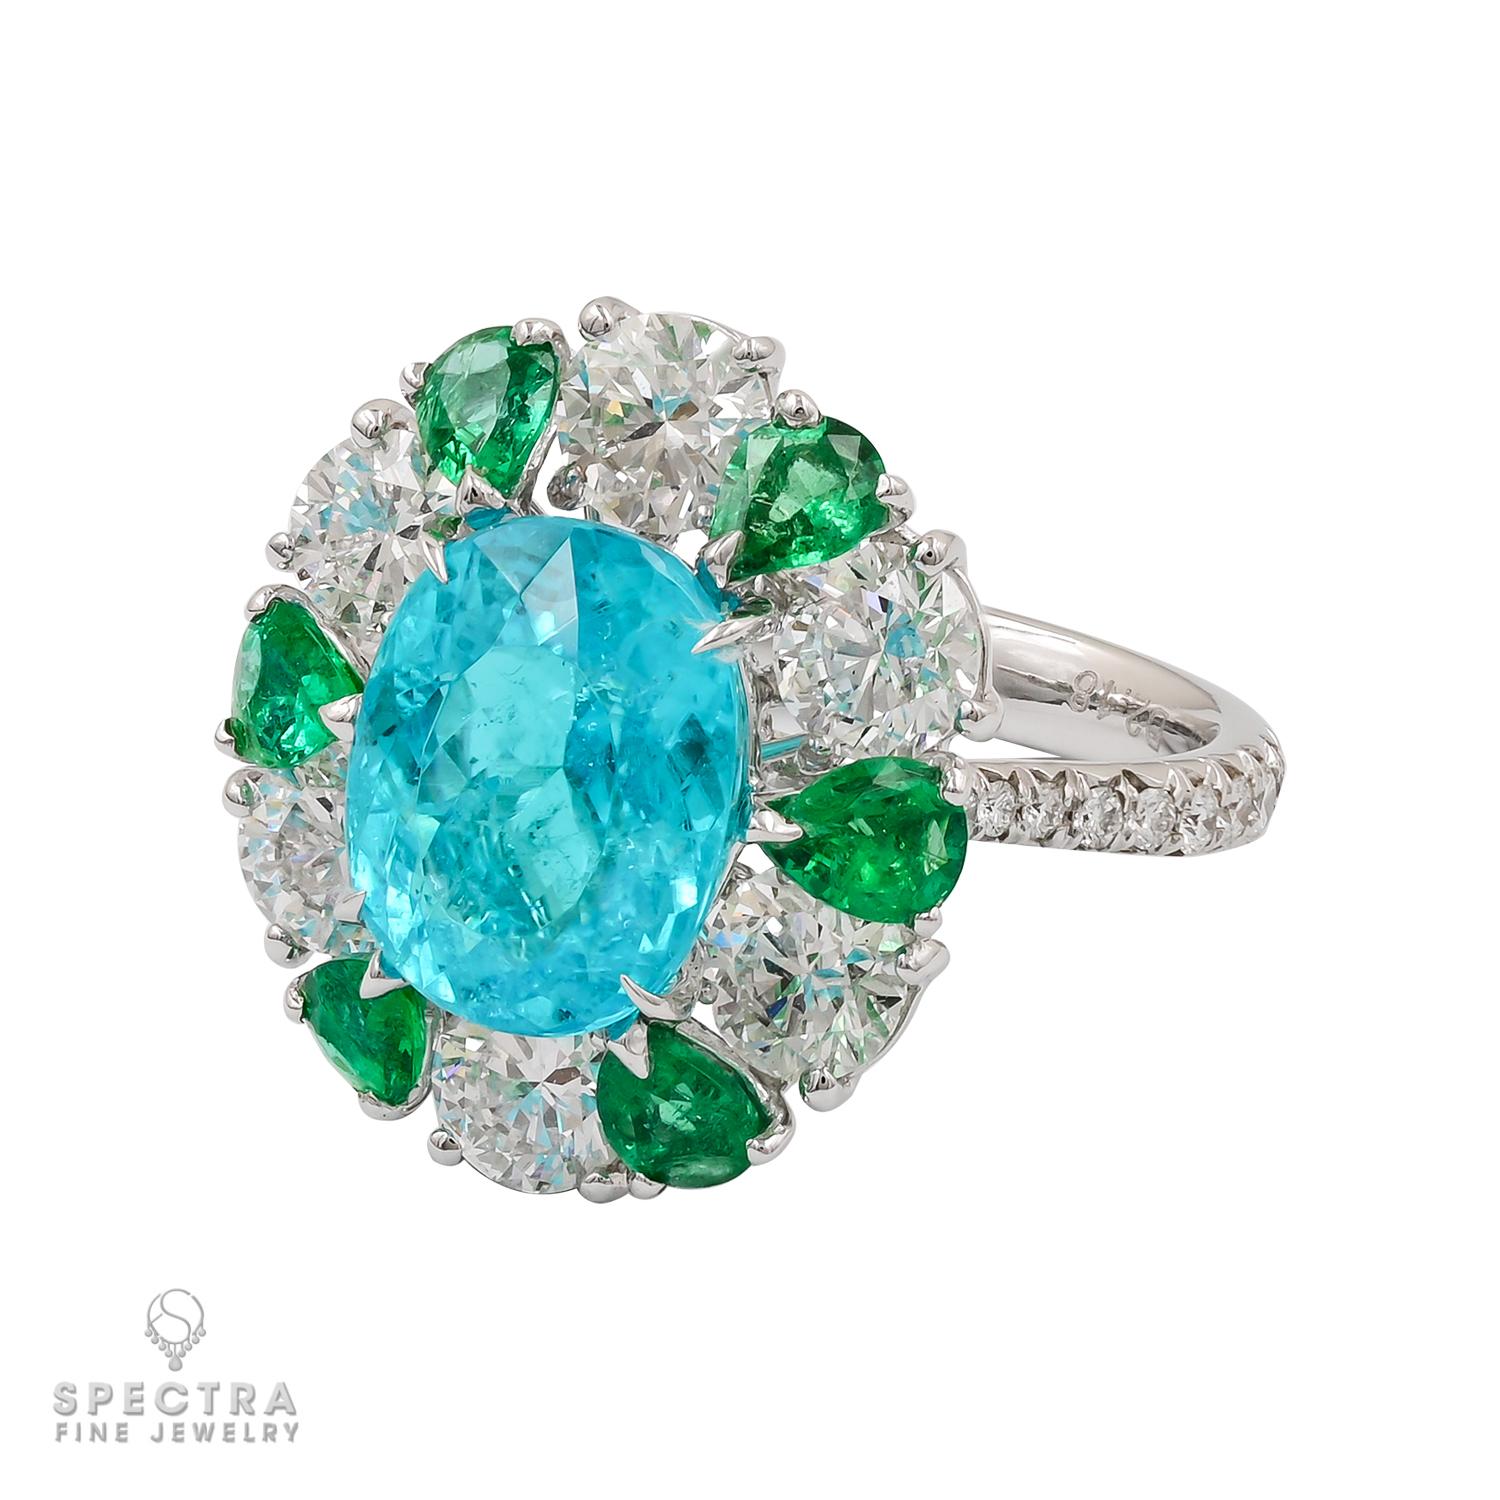 In 1989, exceptionally brightly colored tourmalines were discovered in the state of Paraíba, Brazil and presently are among the world’s most prized gemstones. These rare gems are renowned for showing intense blue colors.

This exquisite ring nestles